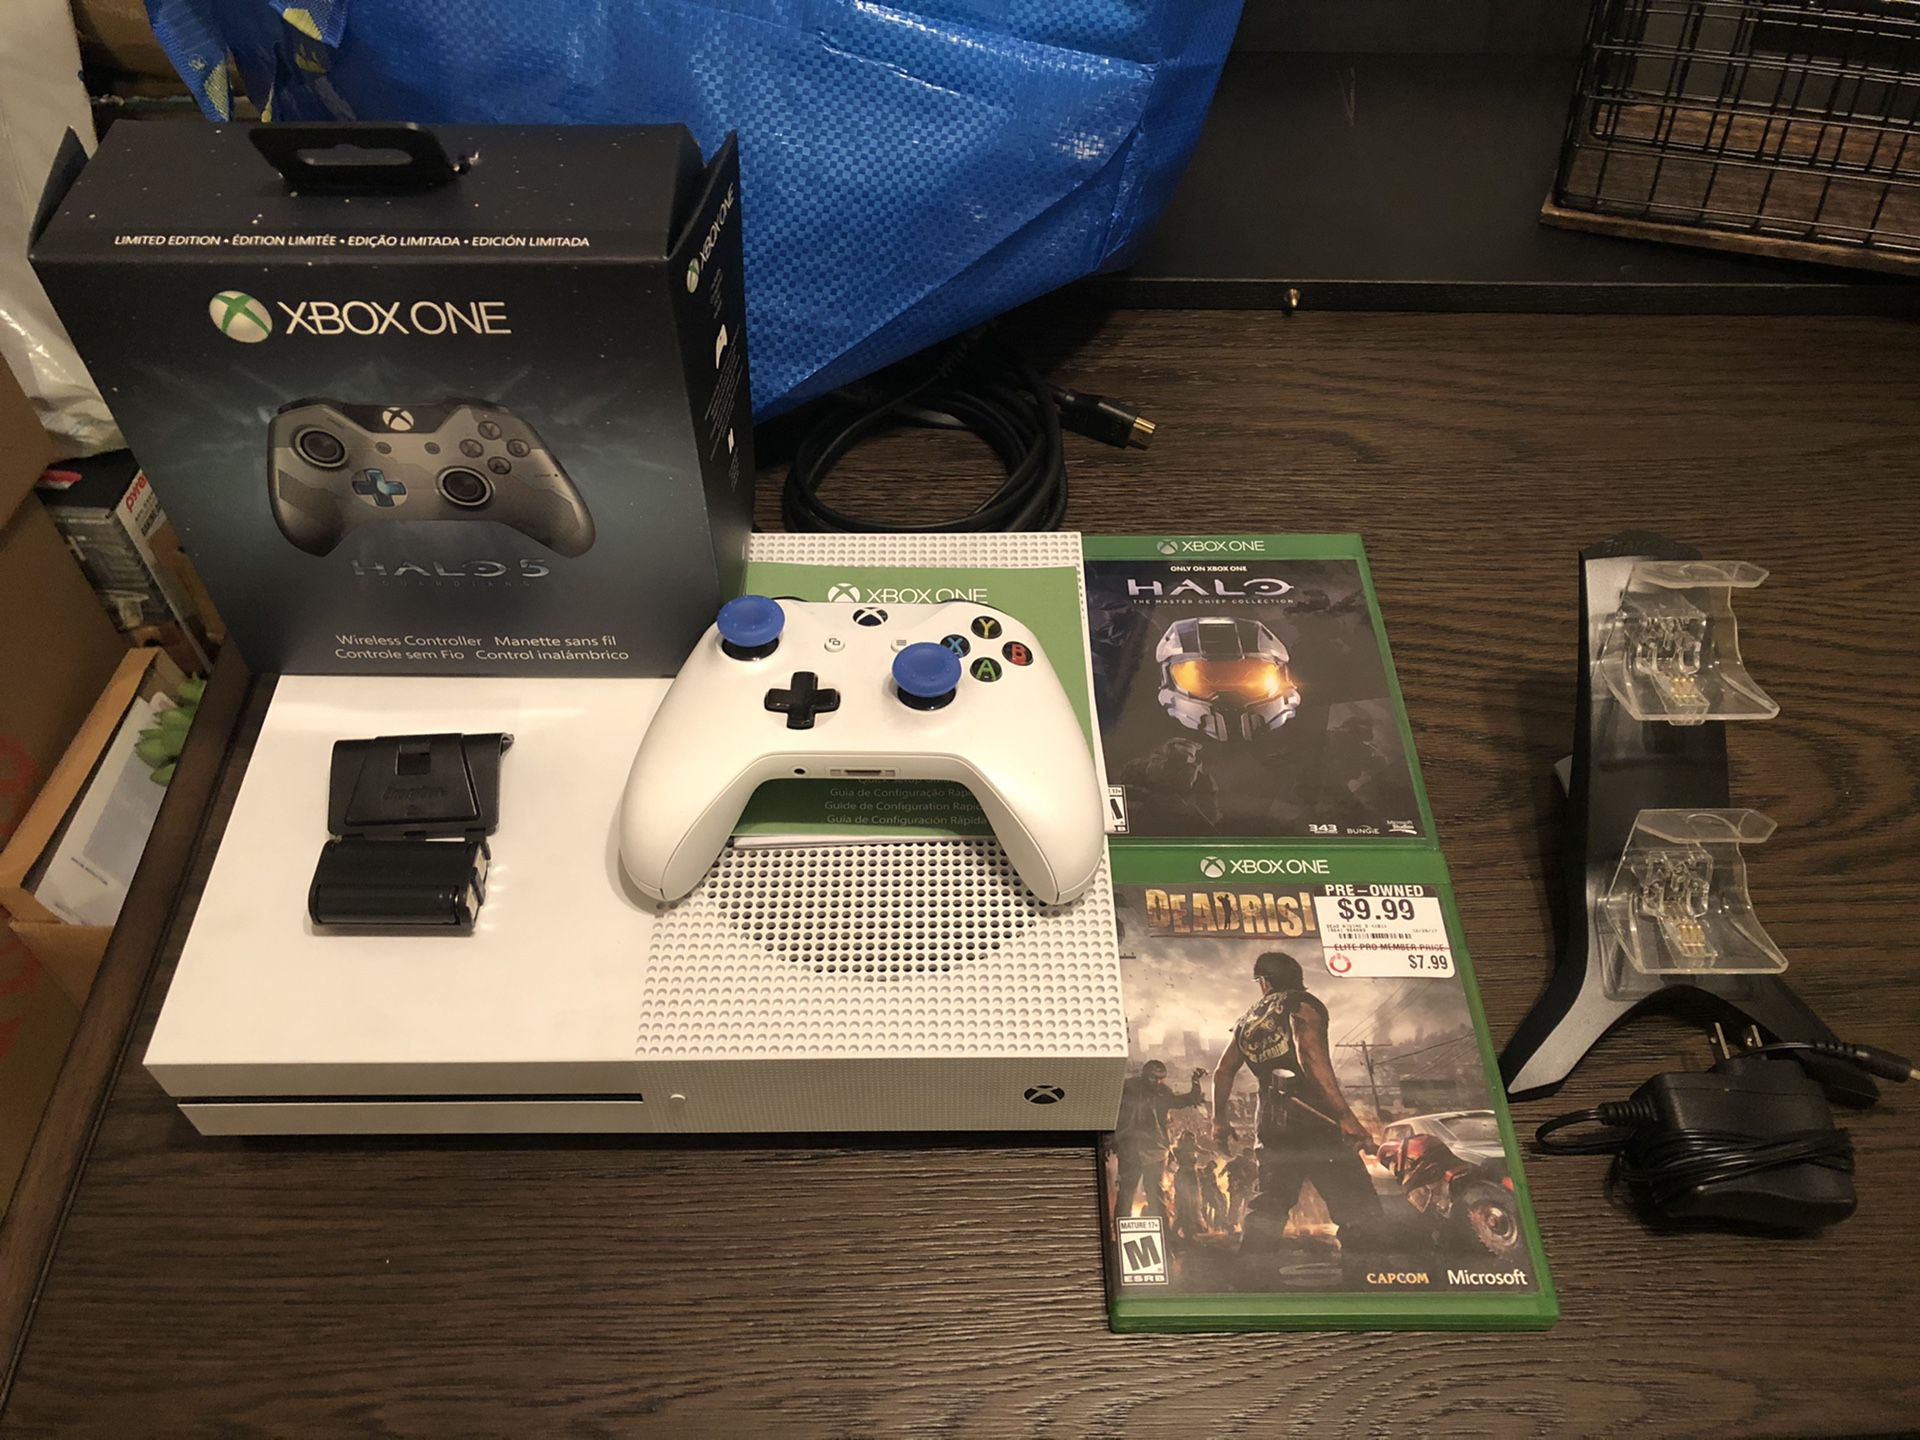 Xbox One S 500GB with Halo 5 Edition Controller, Charging Station, and two Rechargeable Batteries